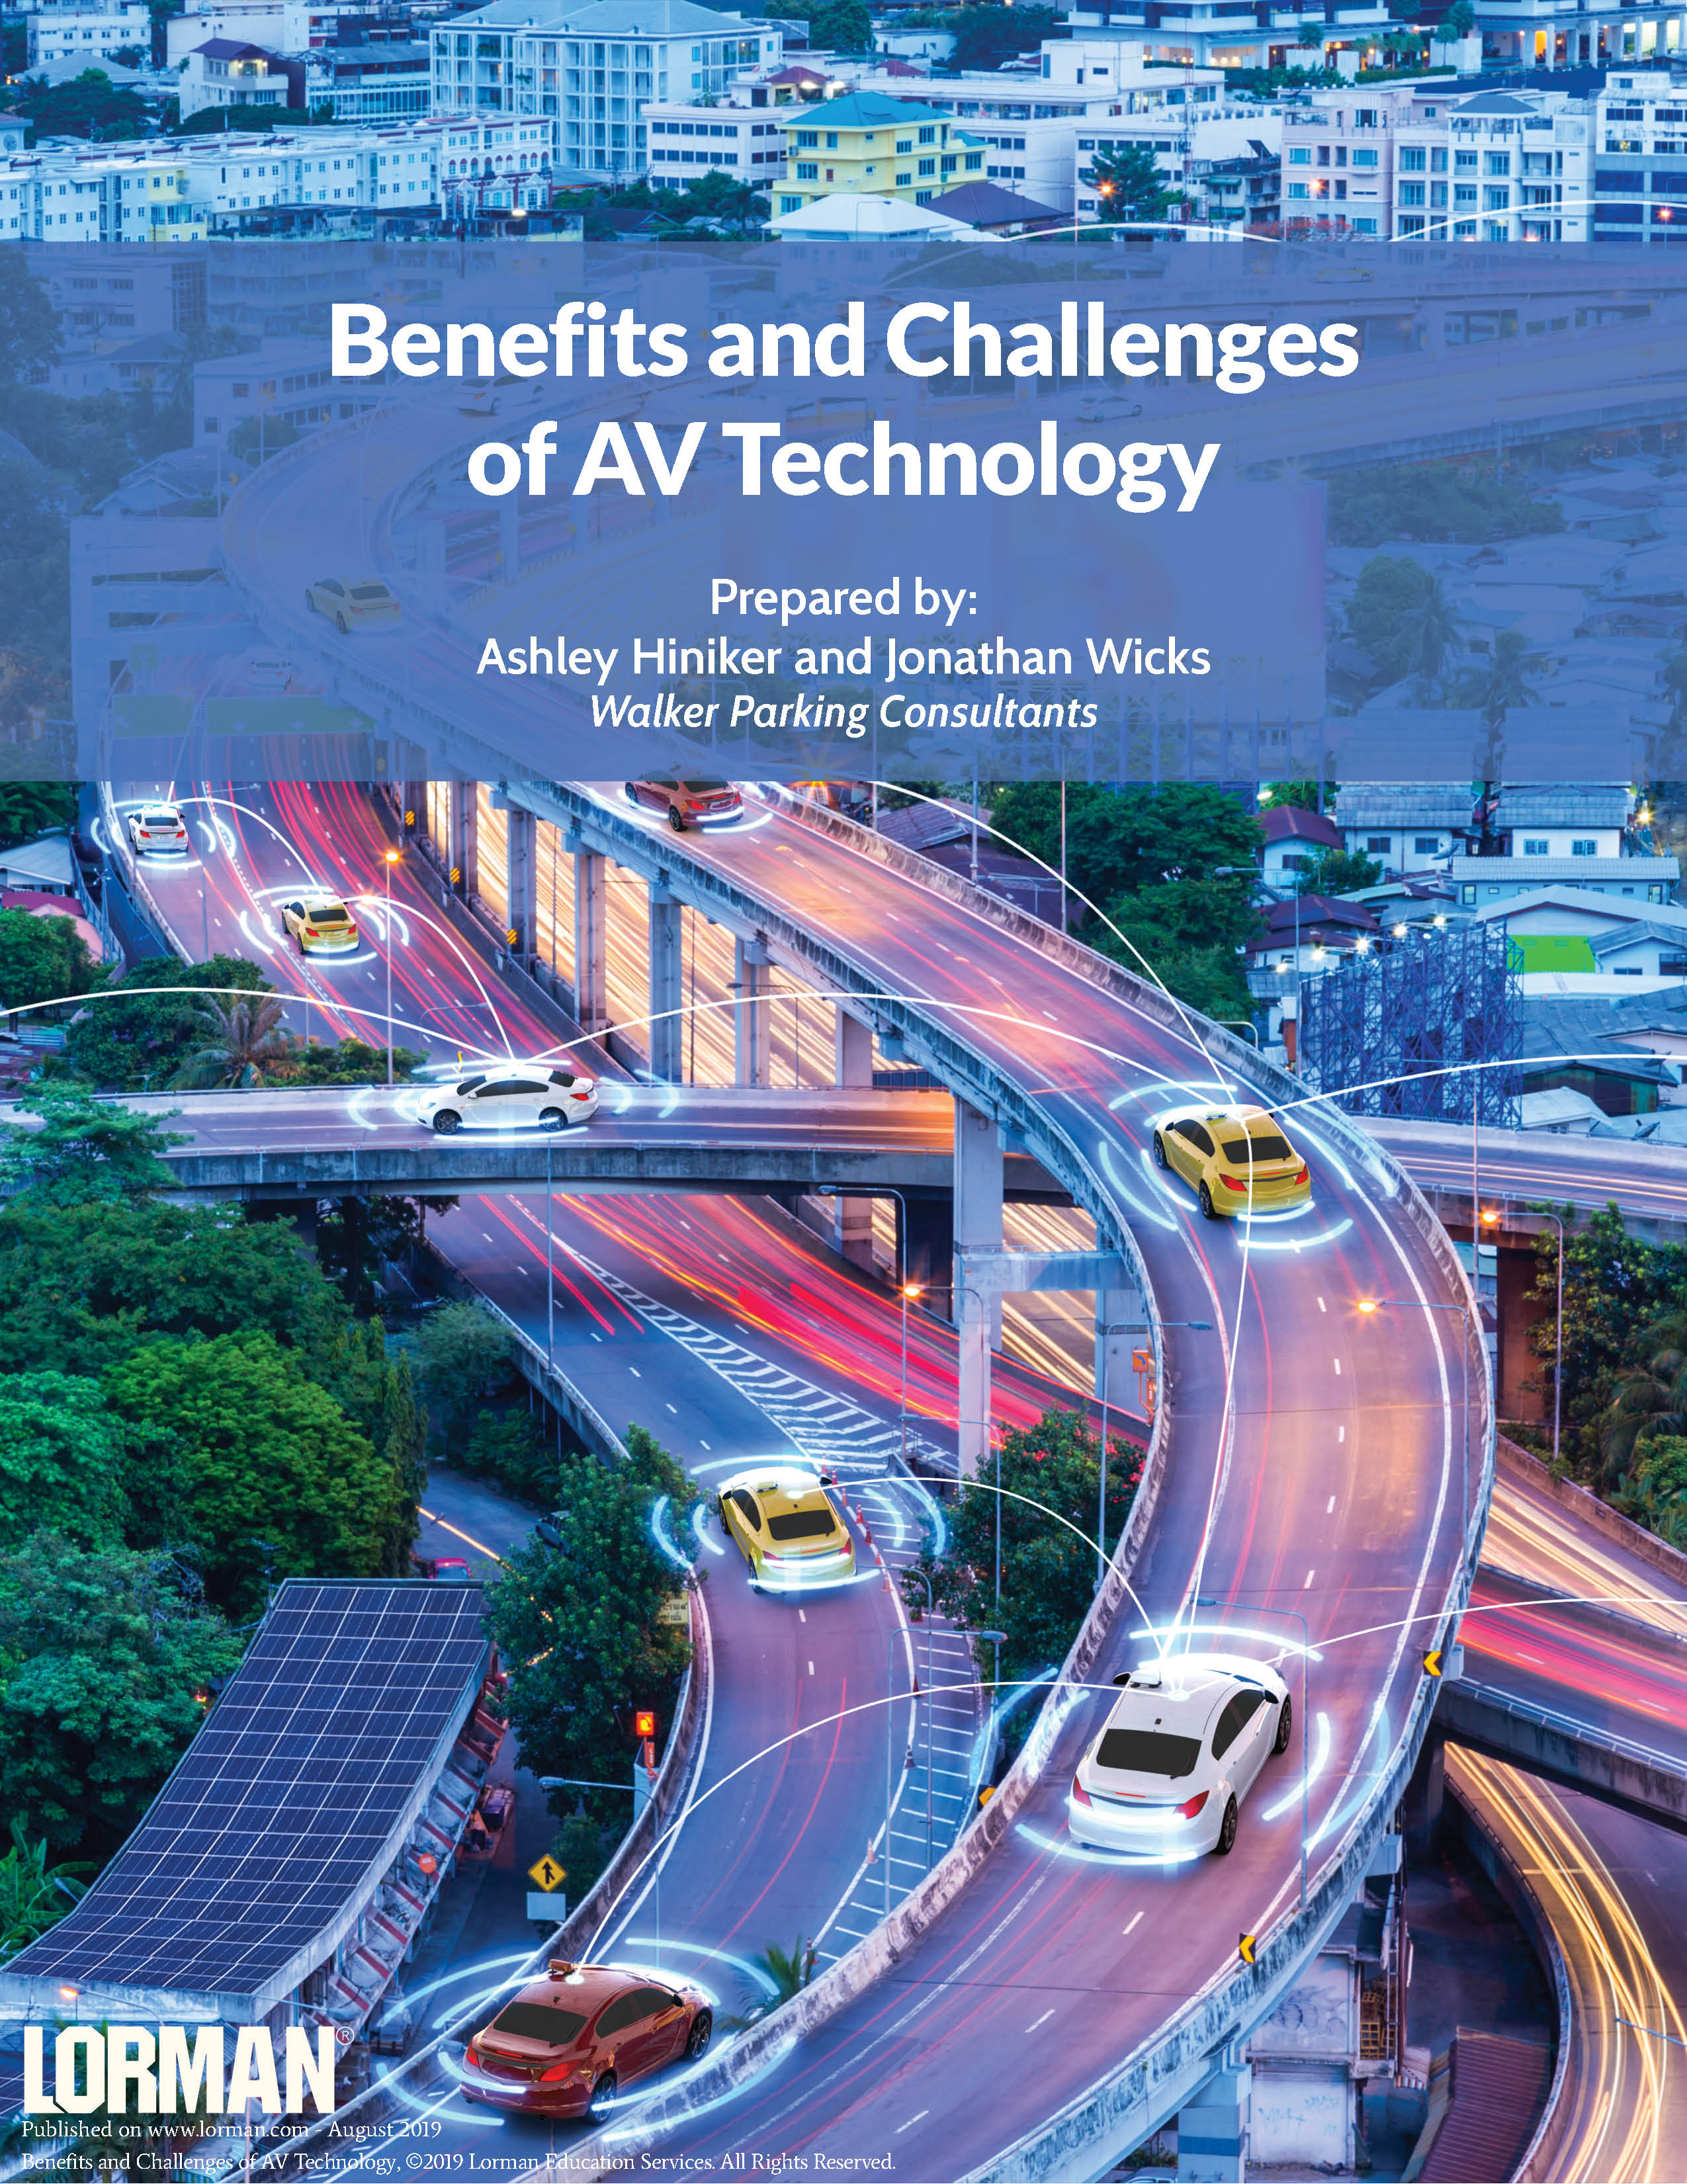 Benefits and Challenges of AV Technology